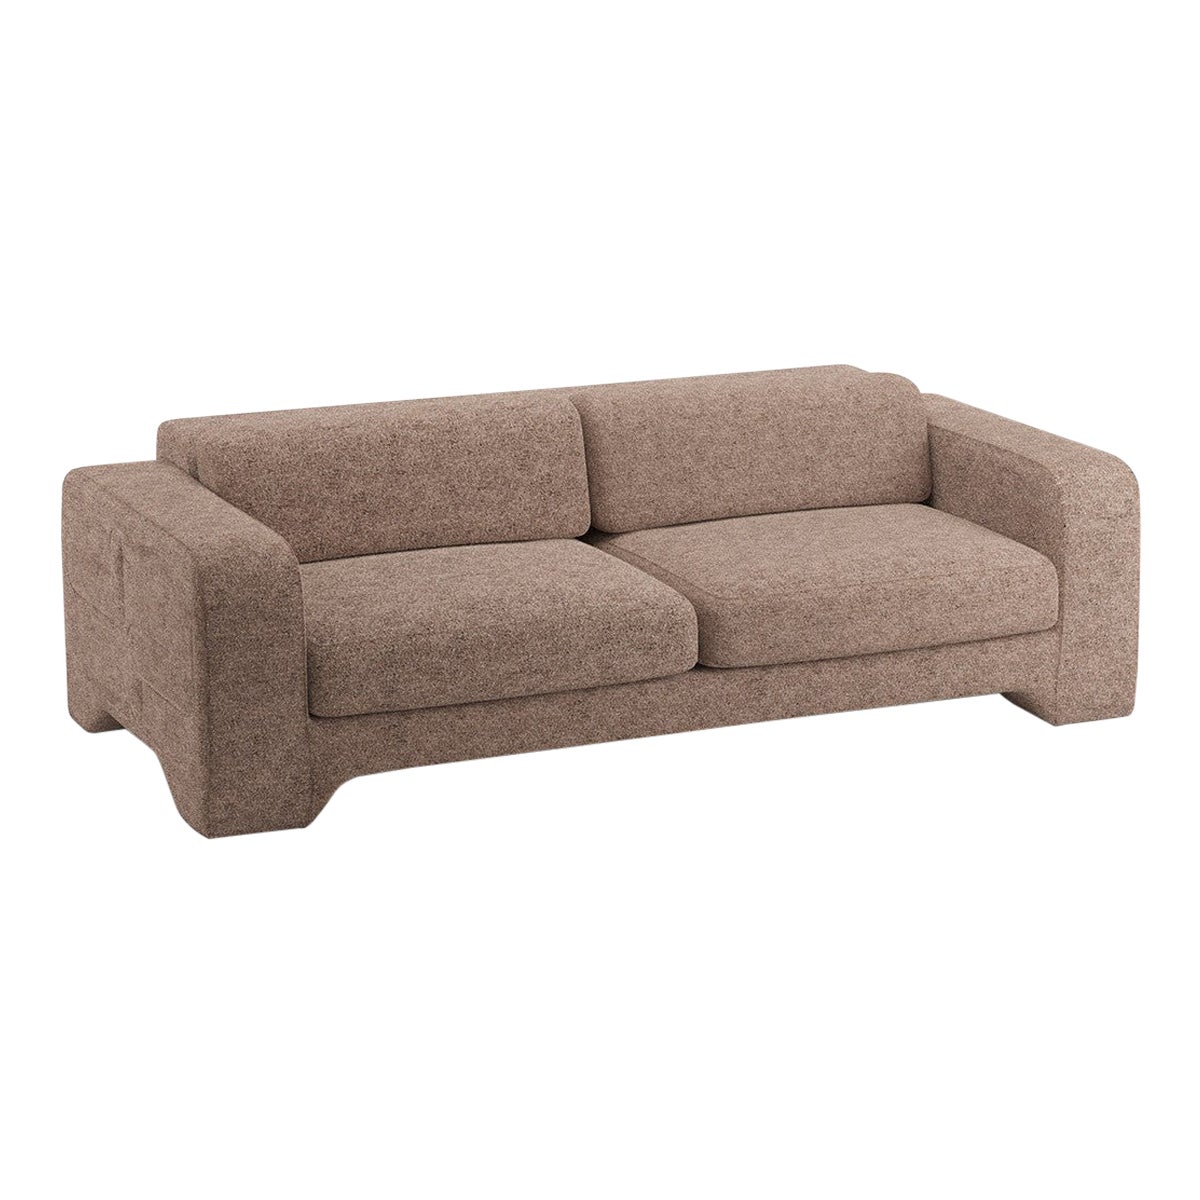 Popus Editions Giovanna 2.5 Seater Sofa in Mole Antwerp Linen Upholstery For Sale